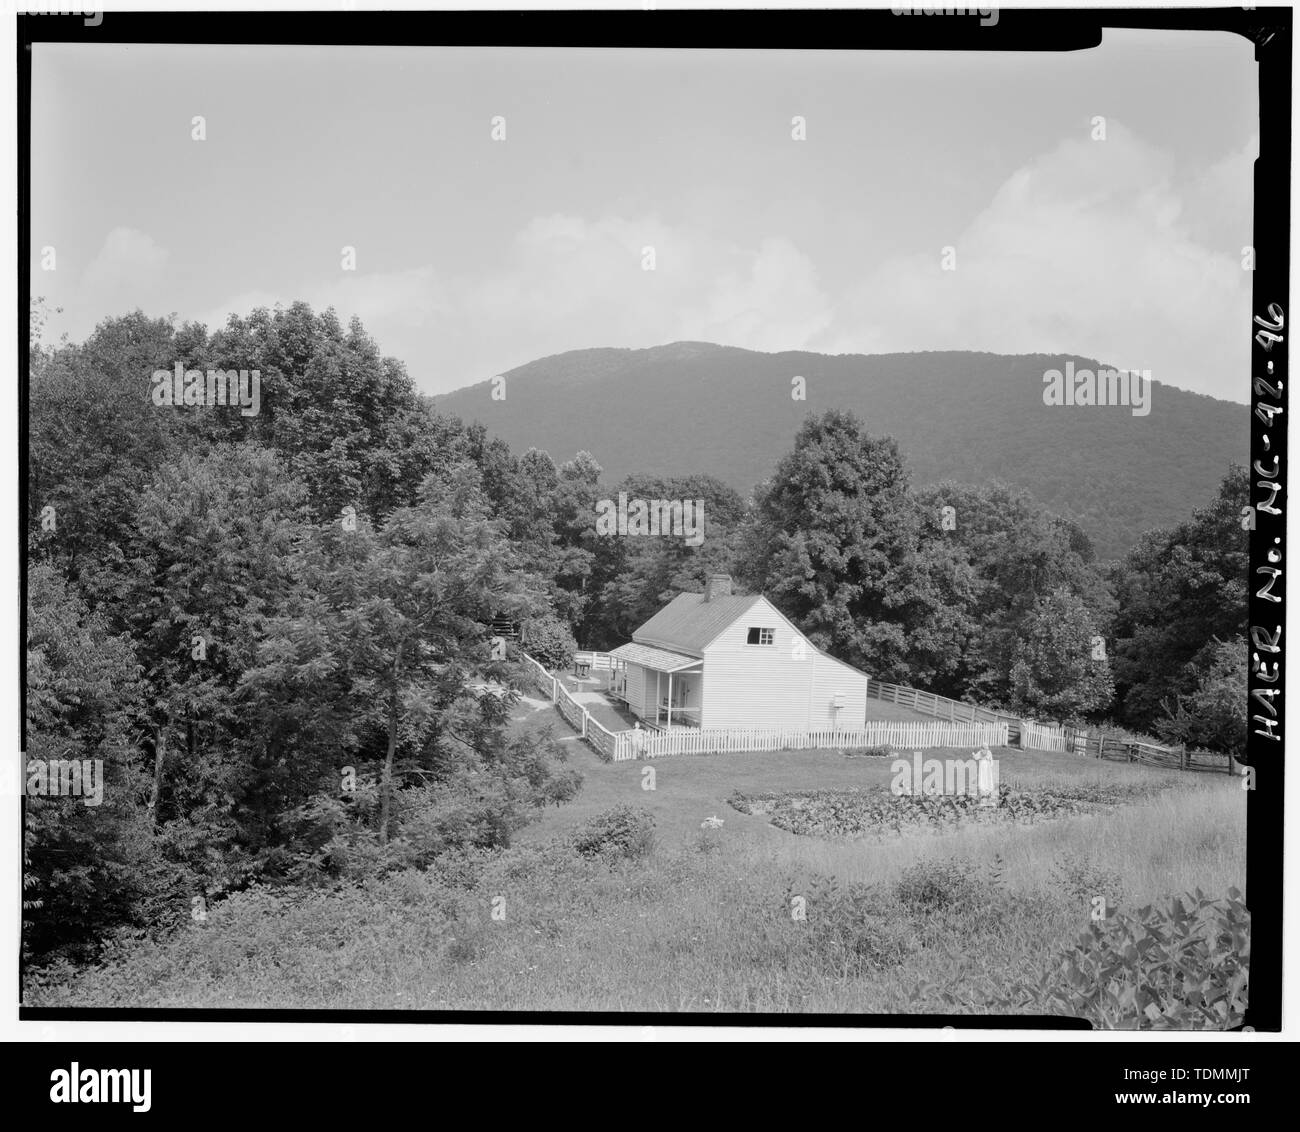 Peaks of Otter. View of the Johnson Farm, one of two historic structures left at peak of otter. The farm's interpretation focuses on the 1930's. Looking southeast. - Blue Ridge Parkway, Between Shenandoah National Park and Great Smoky Mountains, Asheville, Buncombe County, NC Stock Photo